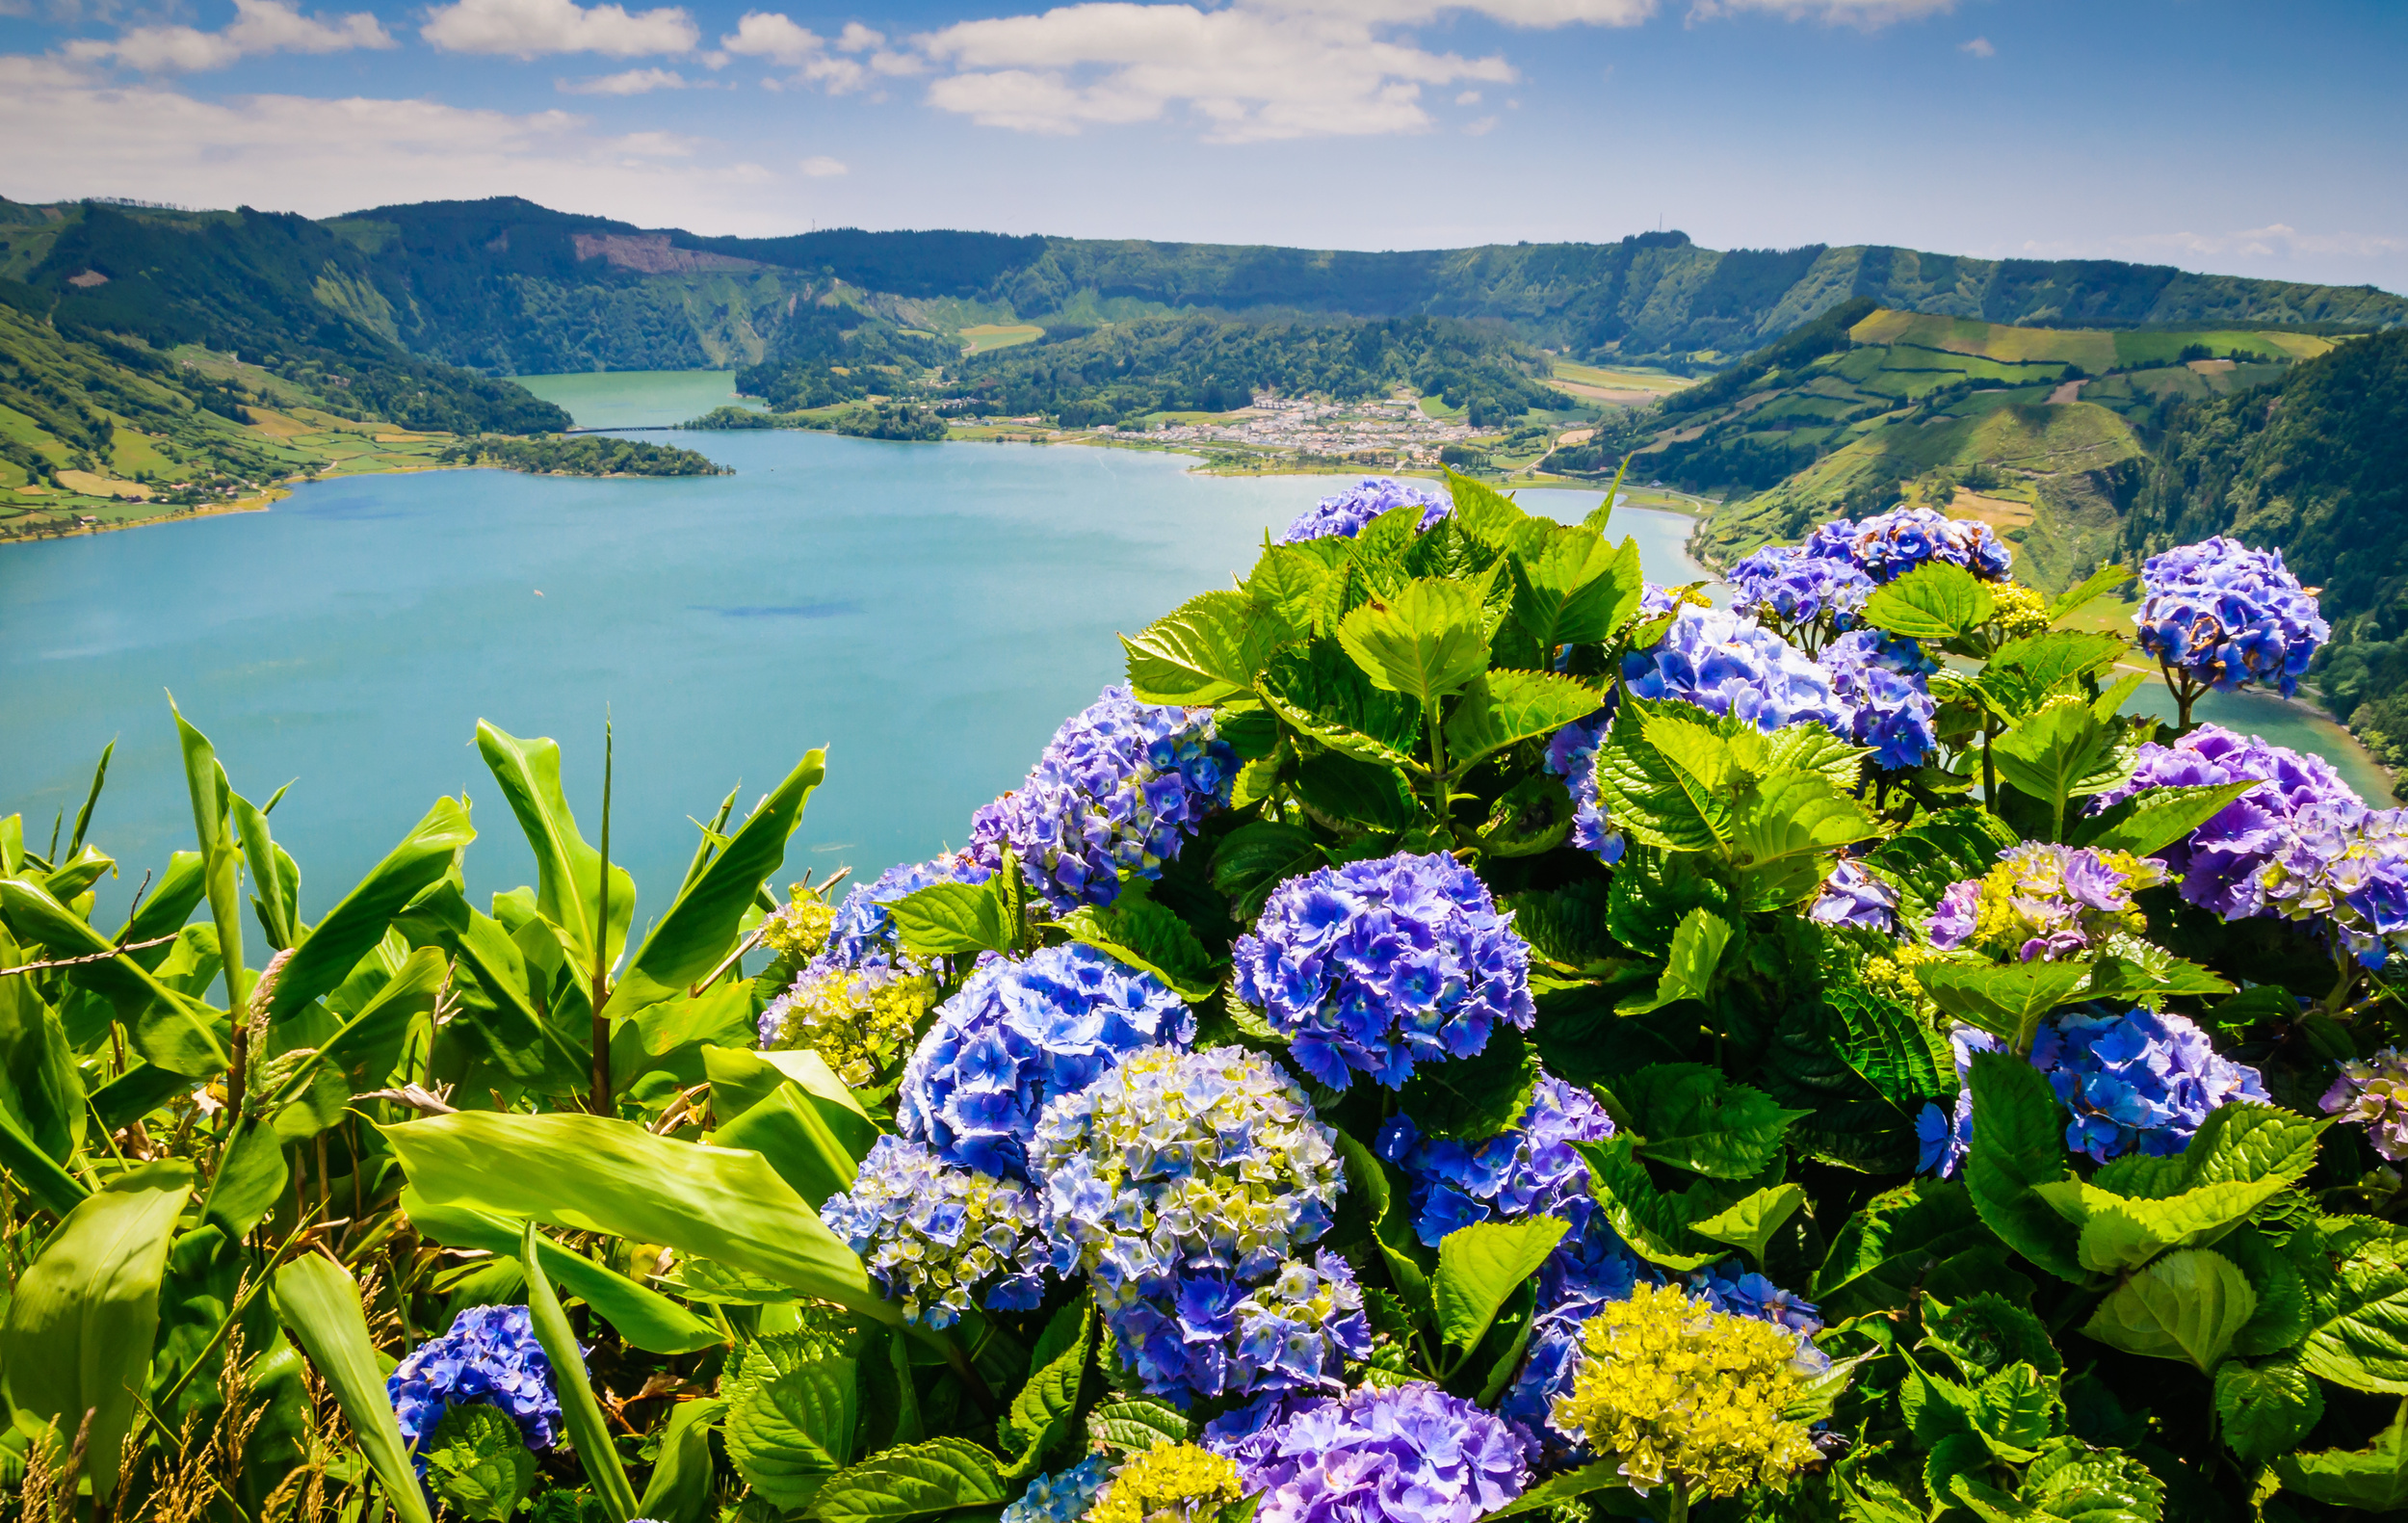 <p>Spring is a delightful time to visit Europe. Visitors will enjoy friendlier prices and fewer crowds. As a bonus, flowers across the continent bloom all season long and make for great trips. Here are 20 European floral getaways to add to your spring travel wishlist!</p>